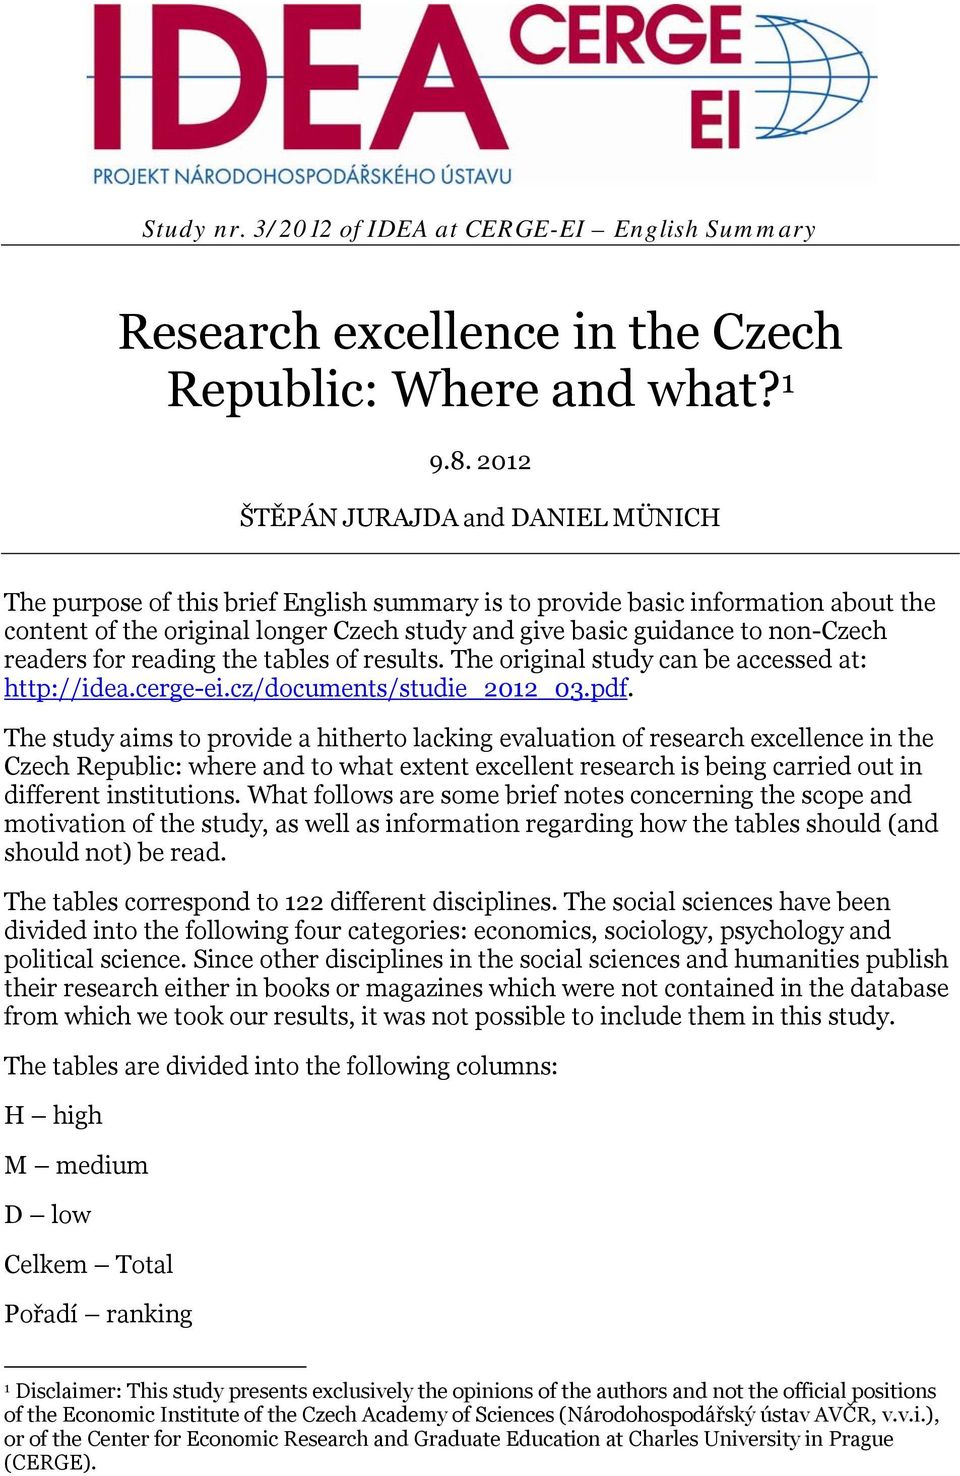 non-czech readers for reading the tables of results. The original study can be accessed at: http://idea.cerge-ei.cz/documents/studie_2012_03.pdf.